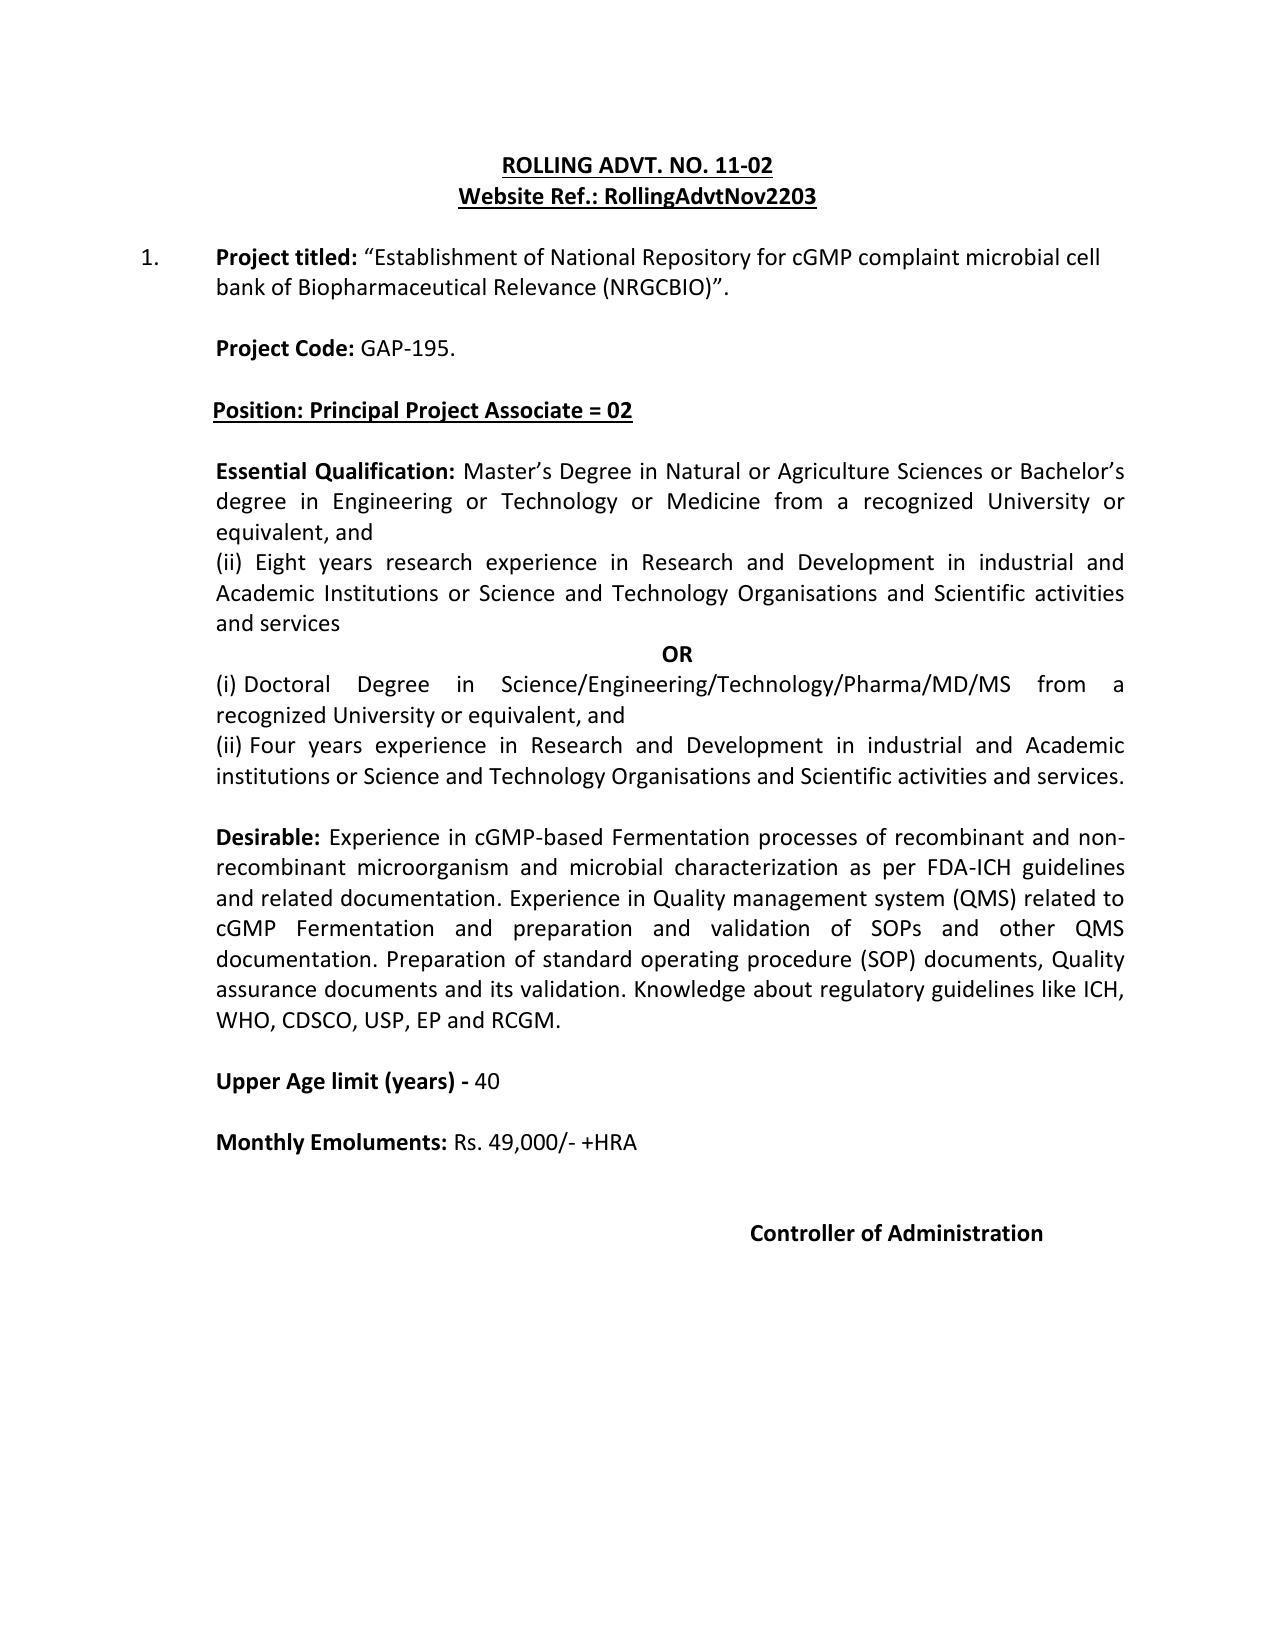 IMTECH Invites Application for Principal Project Associate Recruitment 2022 - Page 1